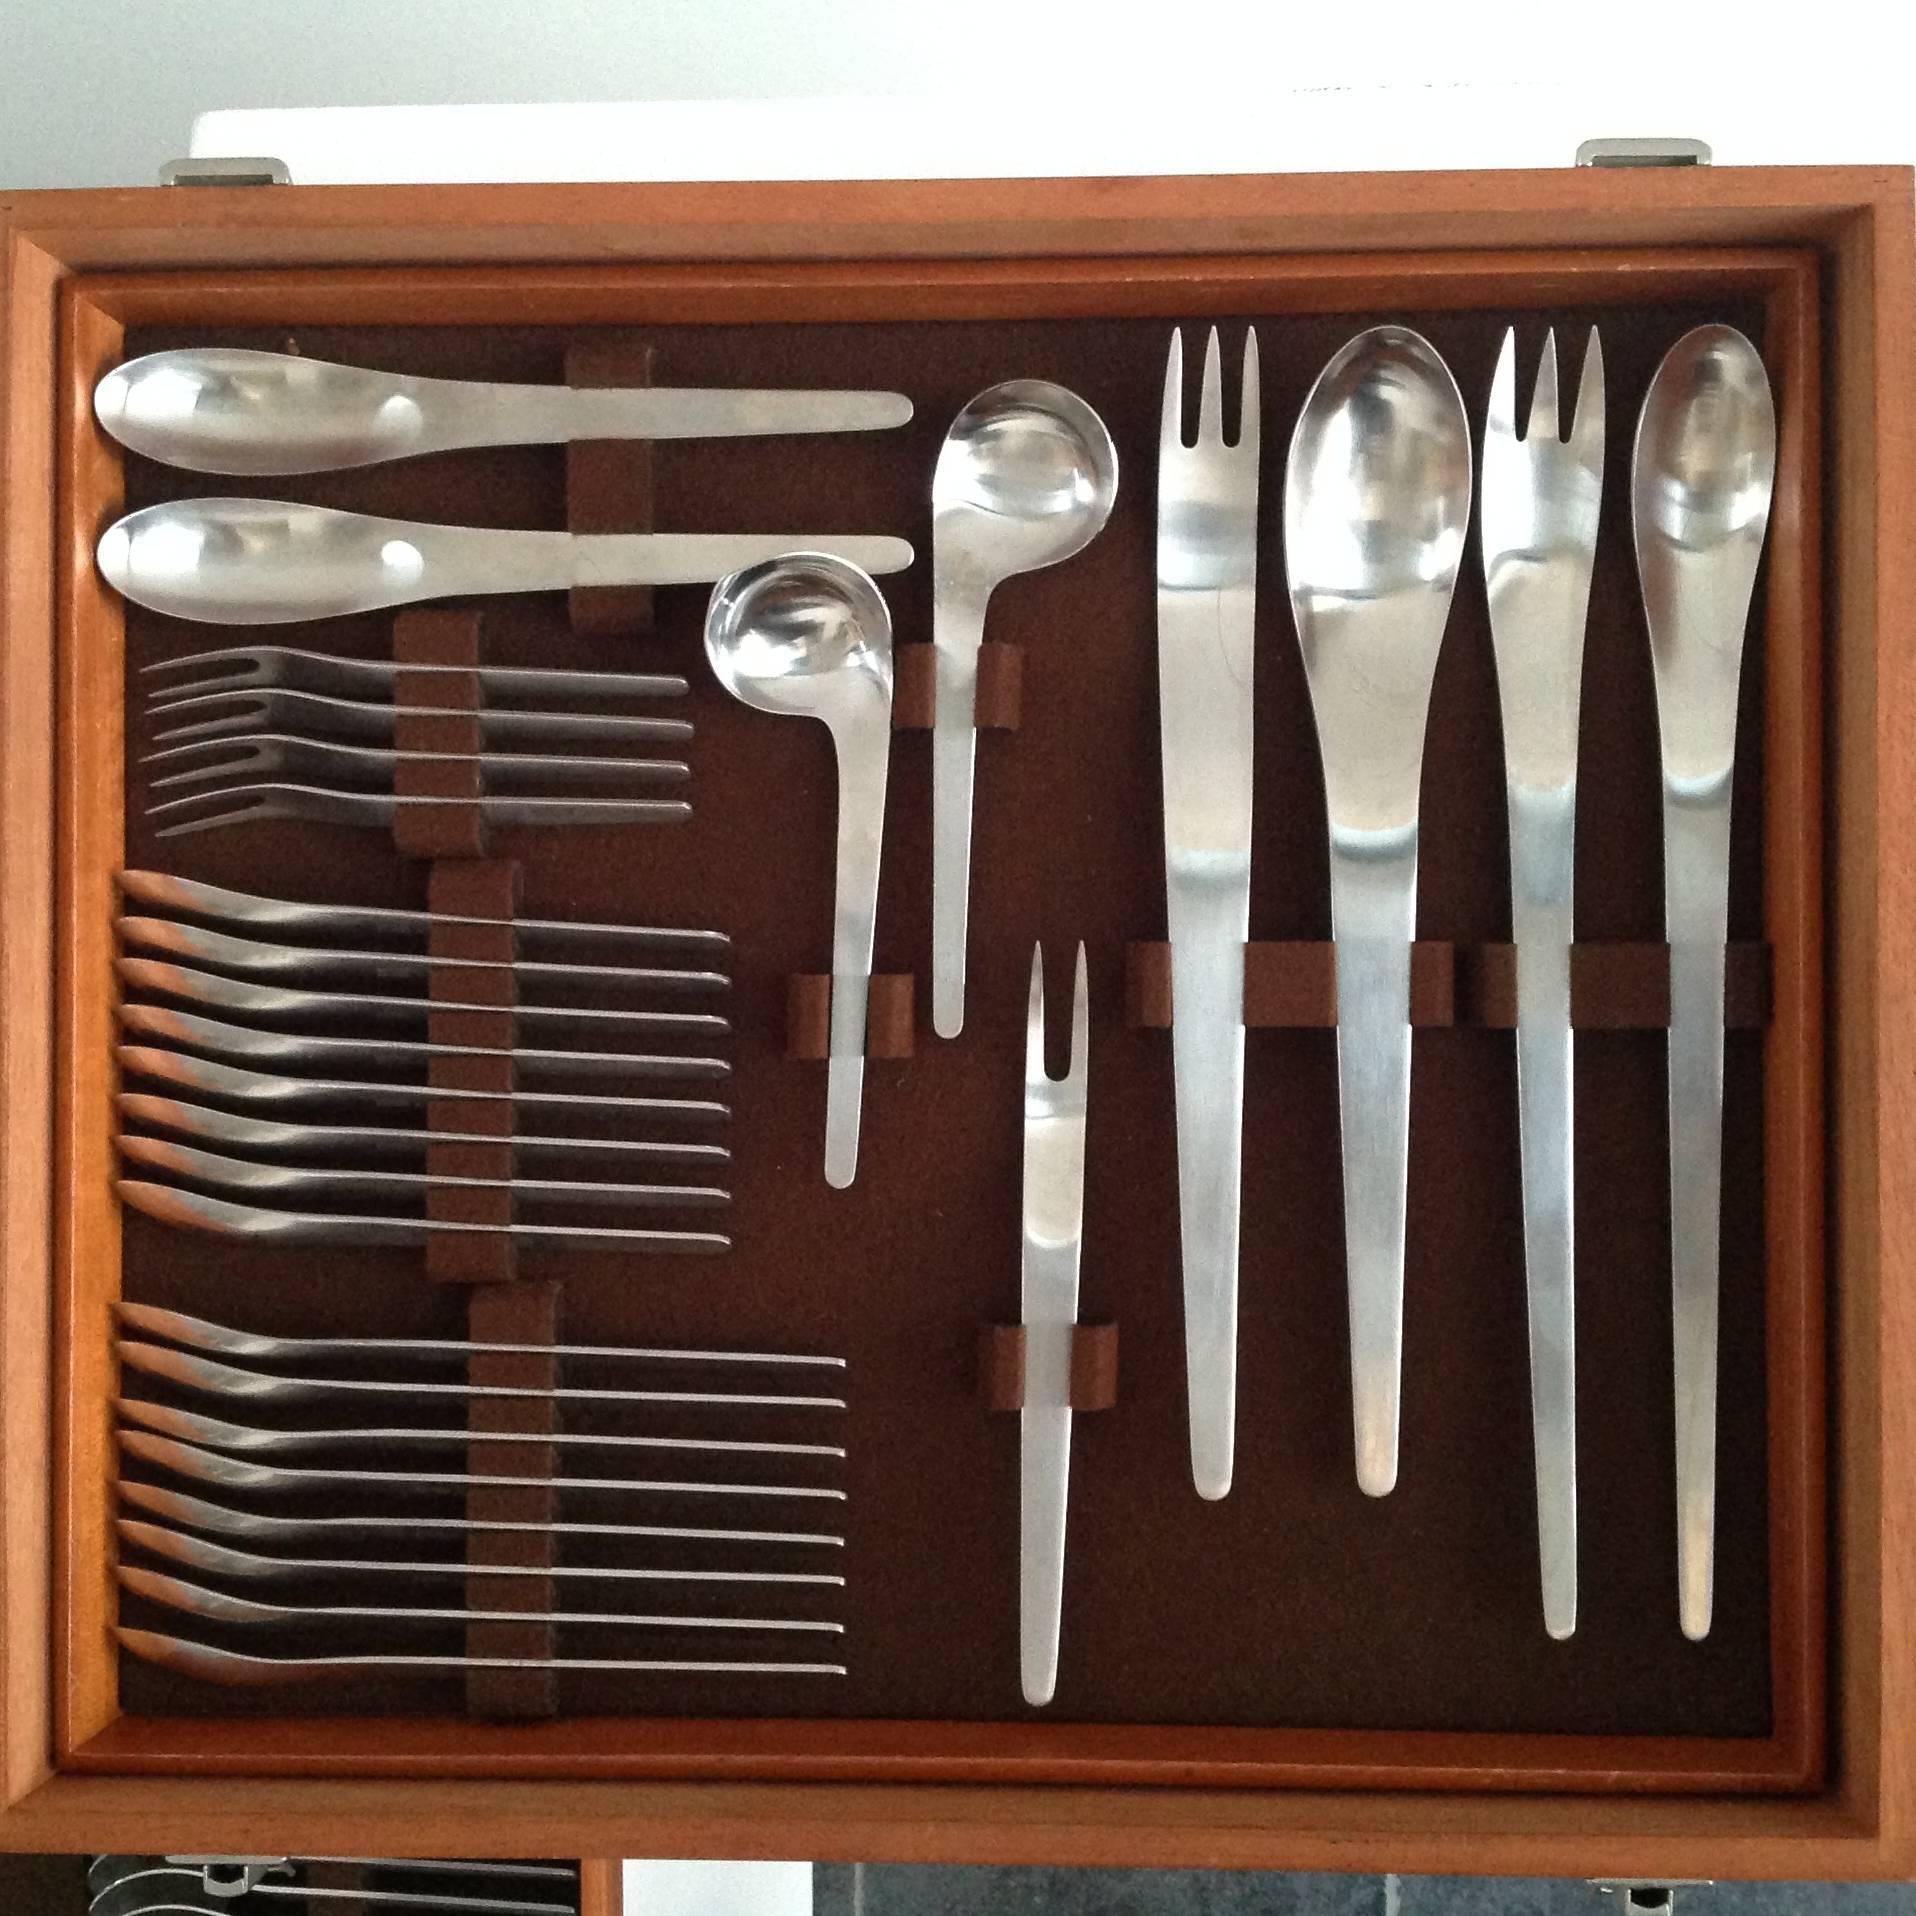 Stainless steel flatware service for eight designed by Arne Jacobsen for A. Michelsen. Complete set of 77 pieces in a original teak storage box. Each piece stamped A. Michelsen, stainless steel, Denmark.

More pictures and with a higher resolution